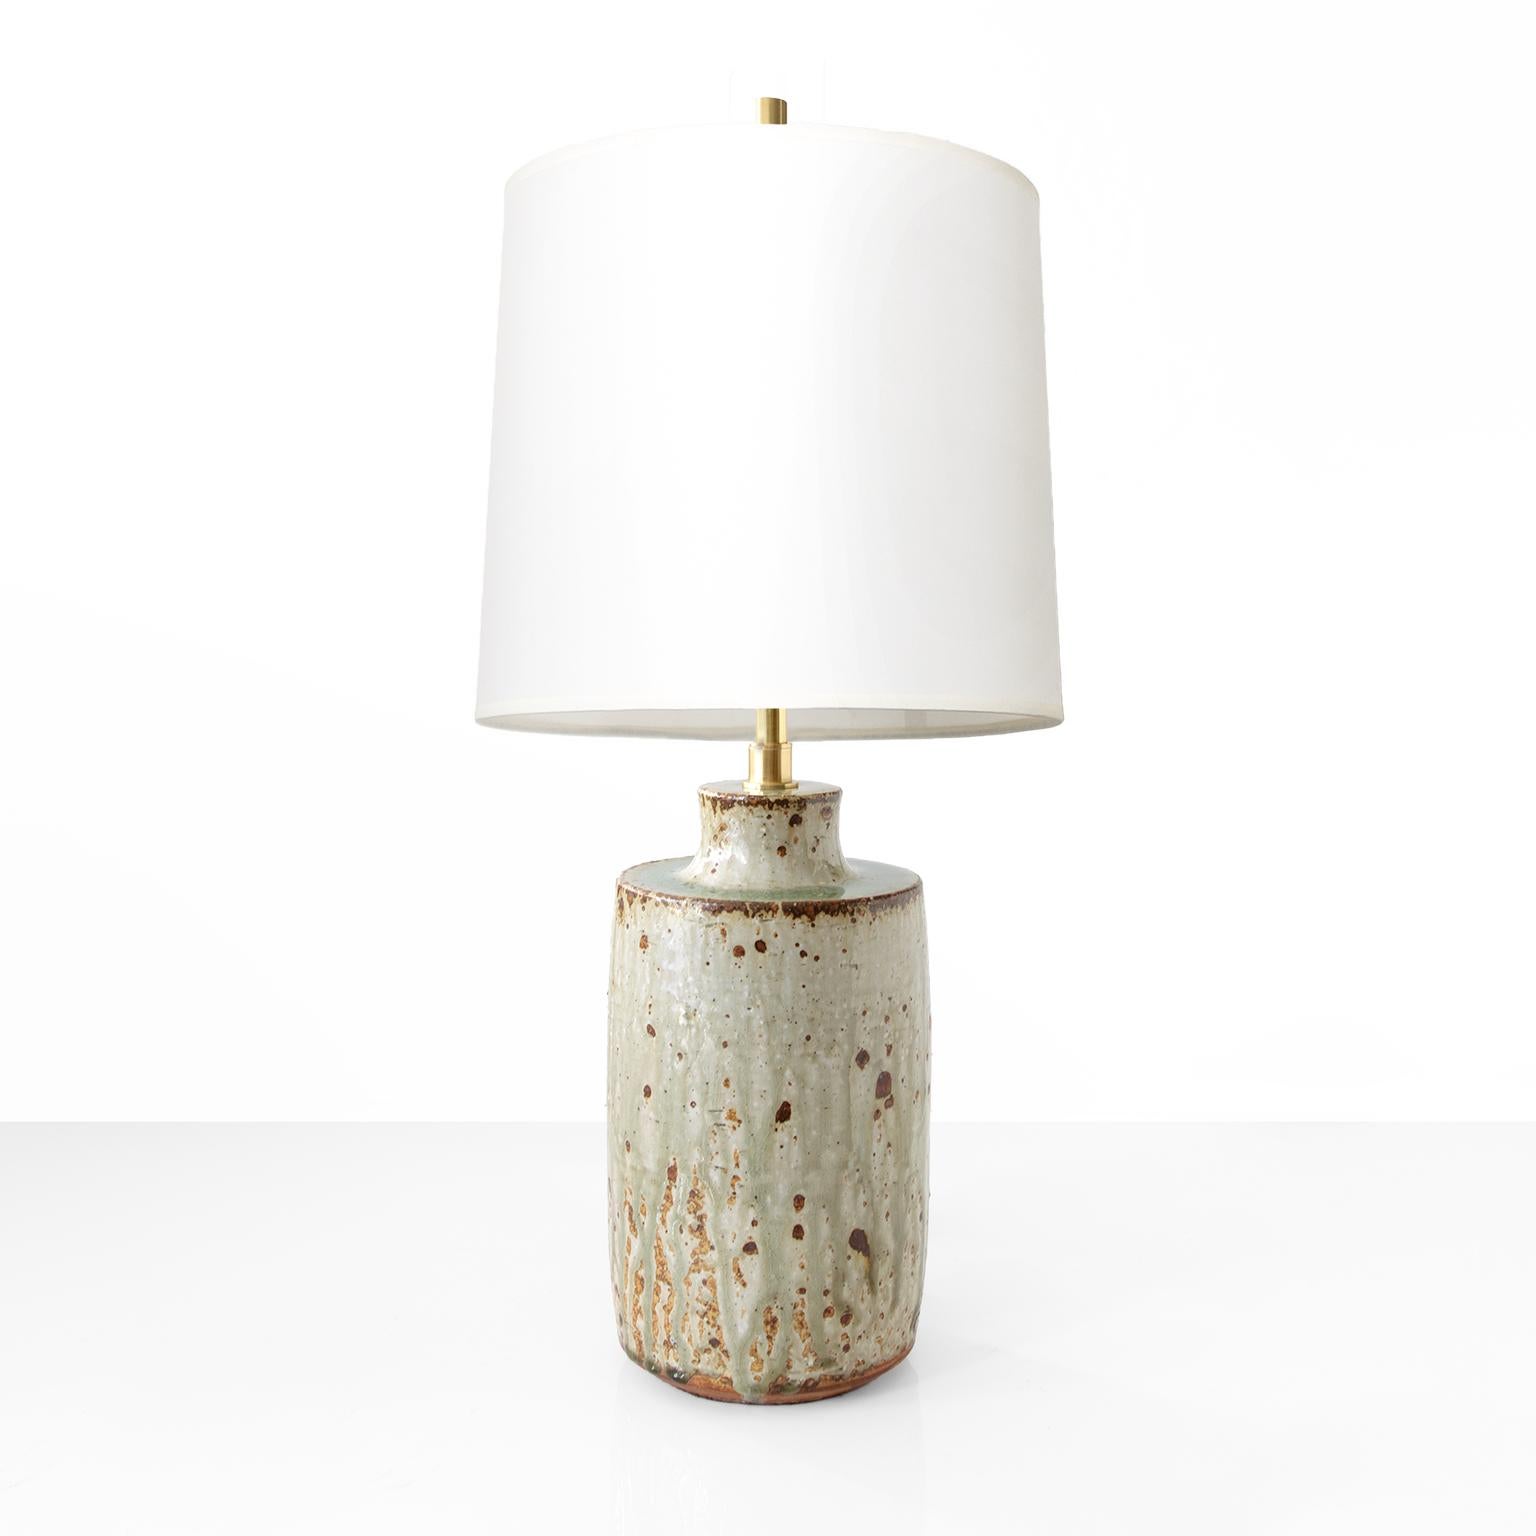 A large glazed stoneware lamp base designed and hand made by Marianne Westman for Rorstrand Atelje, signed on bottom.. Newly restored with polished and lacquered brass stem and a double socket cluster. Ready for use in the USA. Complete with a silk